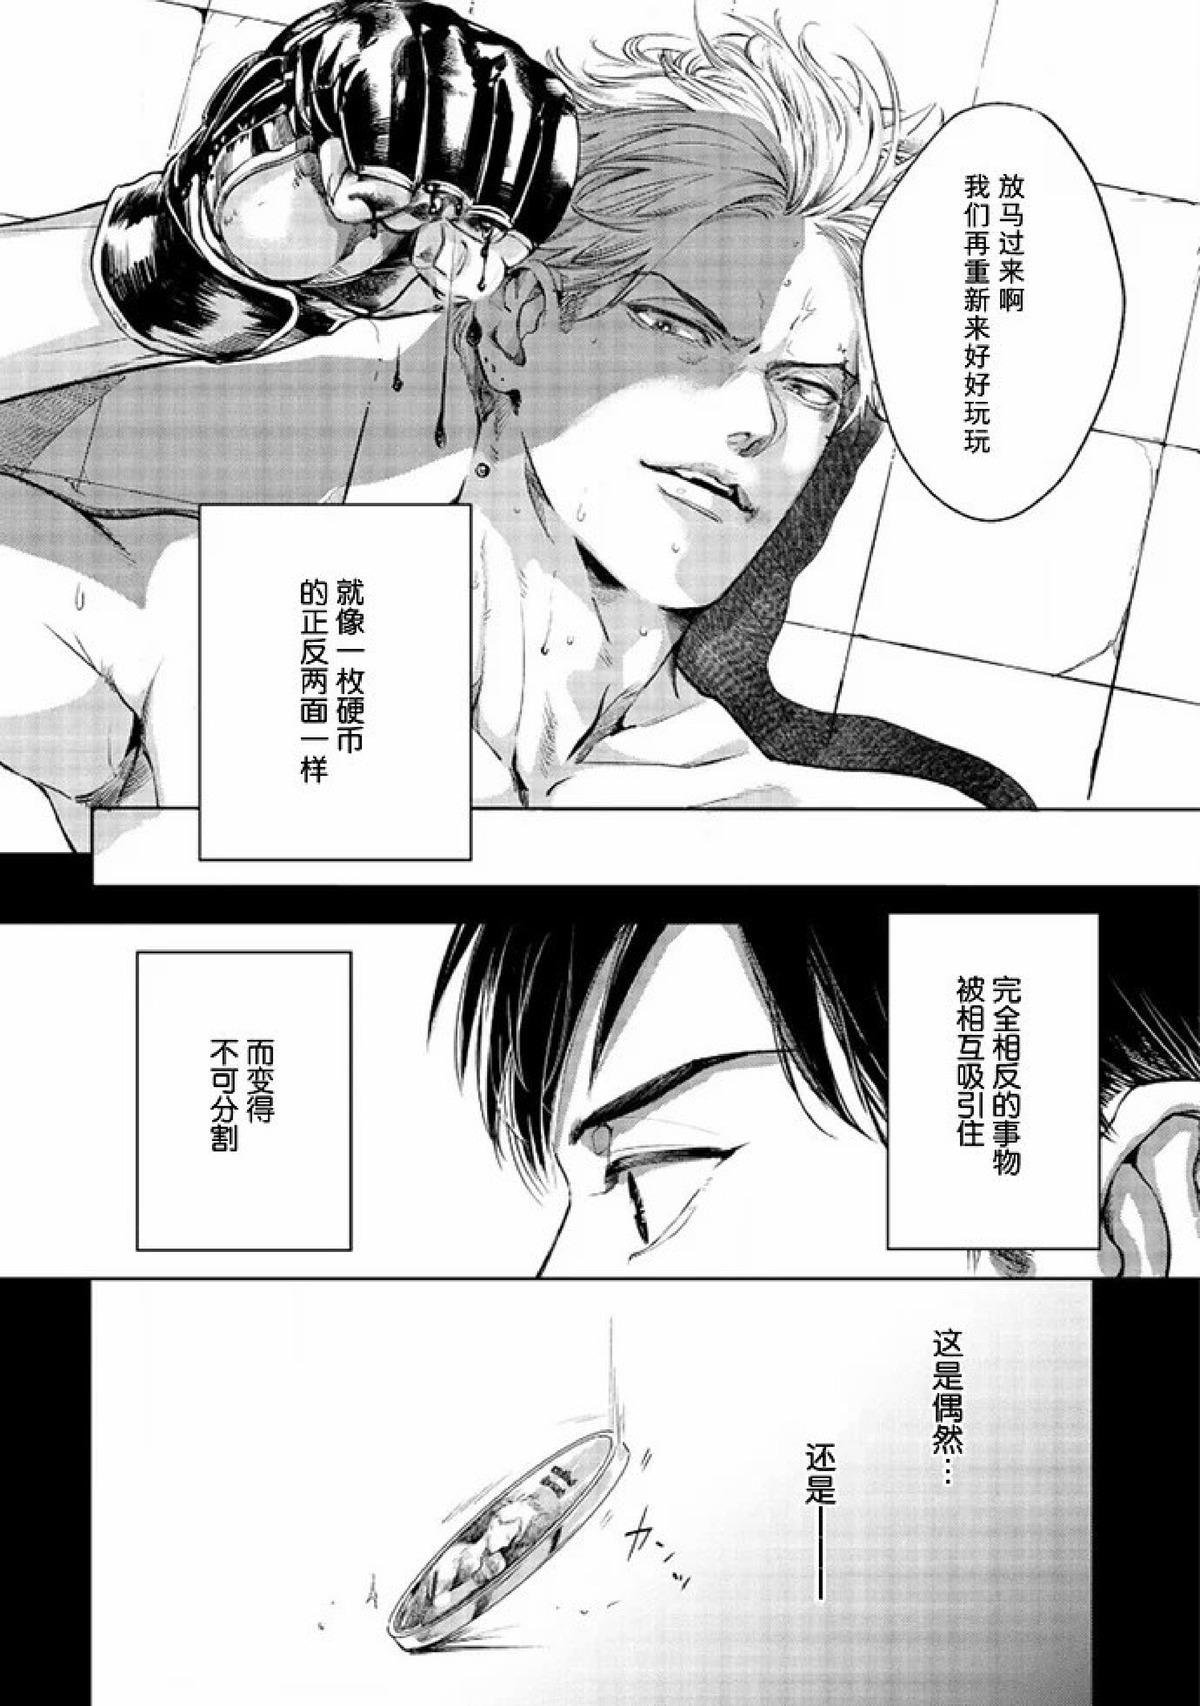 【Two sides of the same coin[耽美]】漫画-（上卷01-02）章节漫画下拉式图片-11.jpg